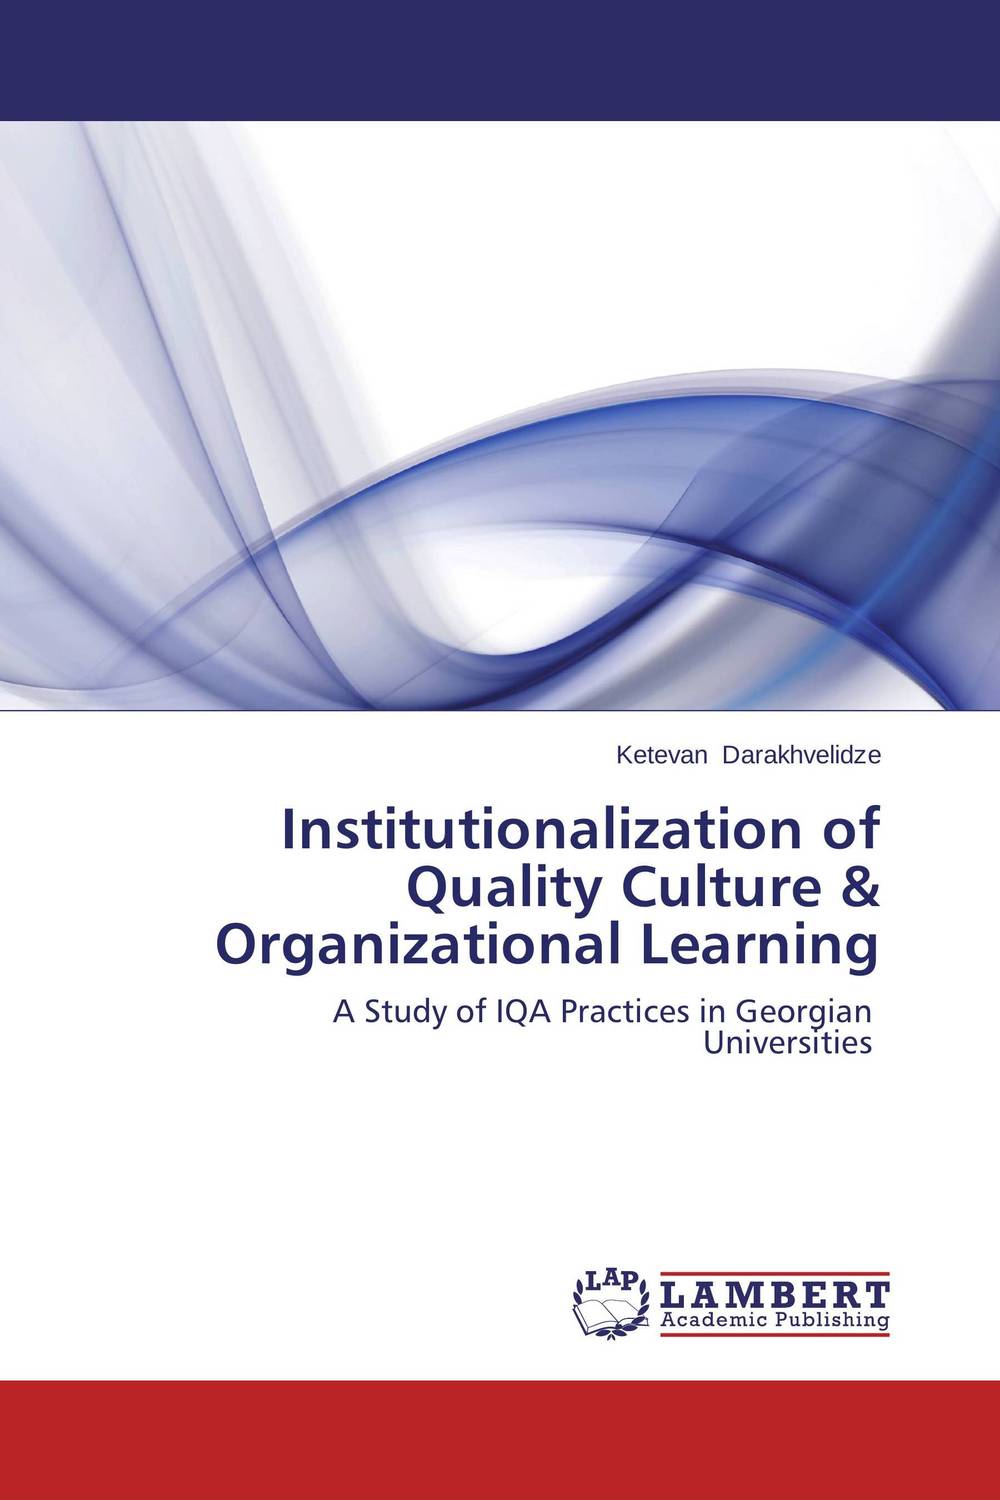 Institutionalization of Quality Culture & Organizational Learning - Ketevan Darakhvelidze12296407The book establishes a baseline on the practices of internal quality assurance workplace and culture in three Georgian universities in the context of the changing national higher education policies and recently established quality assurance surveillance system. Bounded by the new national policy, universities have formally been urged to build up IQA offices that would potentially enhance the quality of the primary processes in higher education. It looks at the recent developments in launching the national quality assurance agenda for universities and reflects on the impact they have had and/or continue to have on changing responses and behaviors at the institutional level from the empirical perspective. The book reviews noticeable organizational changes - changes in organizational arrangements, in relation to setting up IQA systems in universities while addressing the major question of whether there are elements of genuine learning within the respective academic organizations, as it...